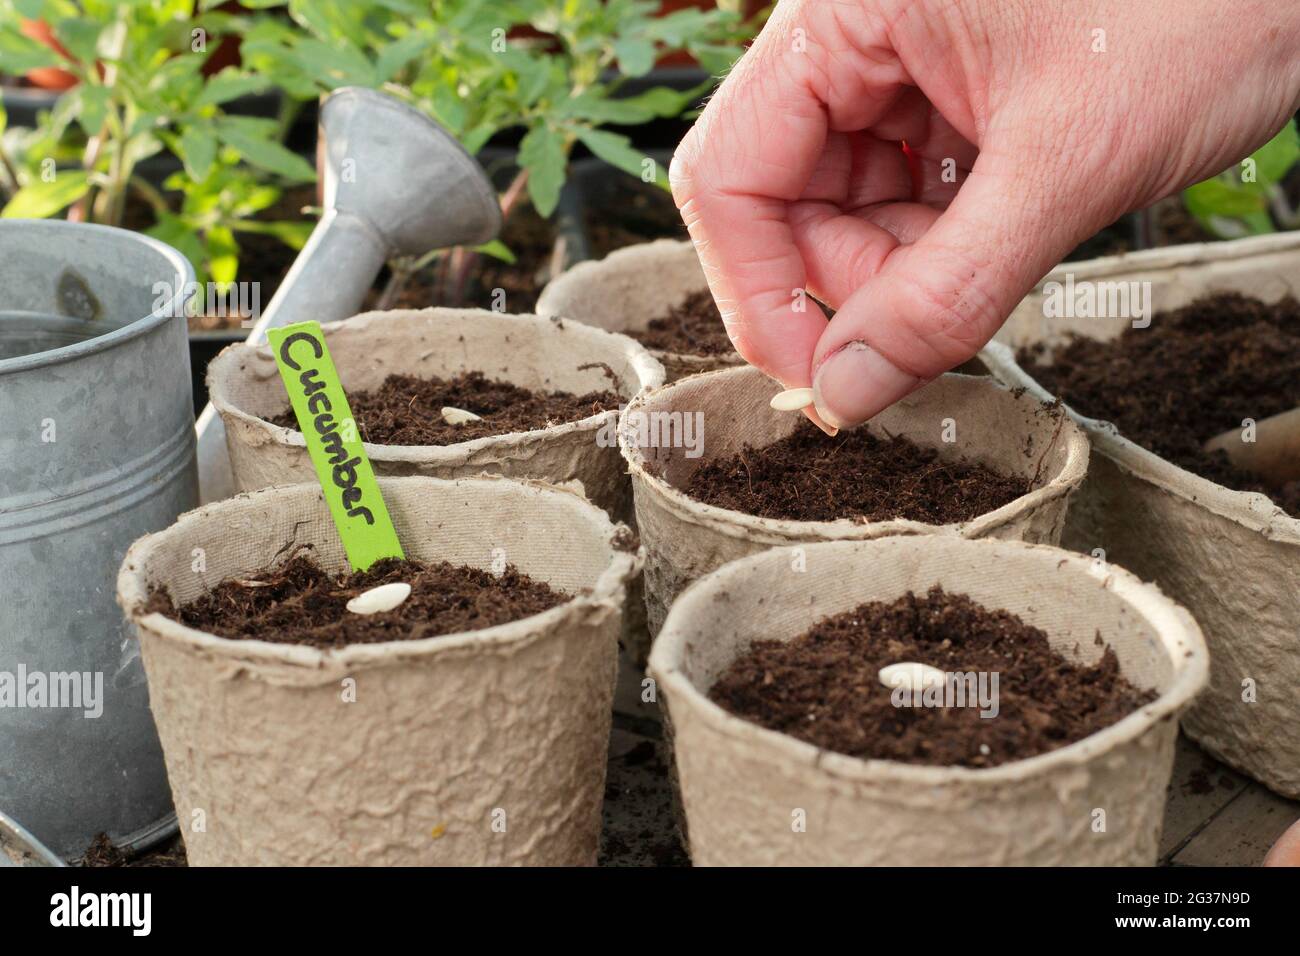 Sowing cucumbers. Woman starting off cucumber seeds - Cucumis sativus 'Burpless Tasty Green' individually into clay pots. UK Stock Photo